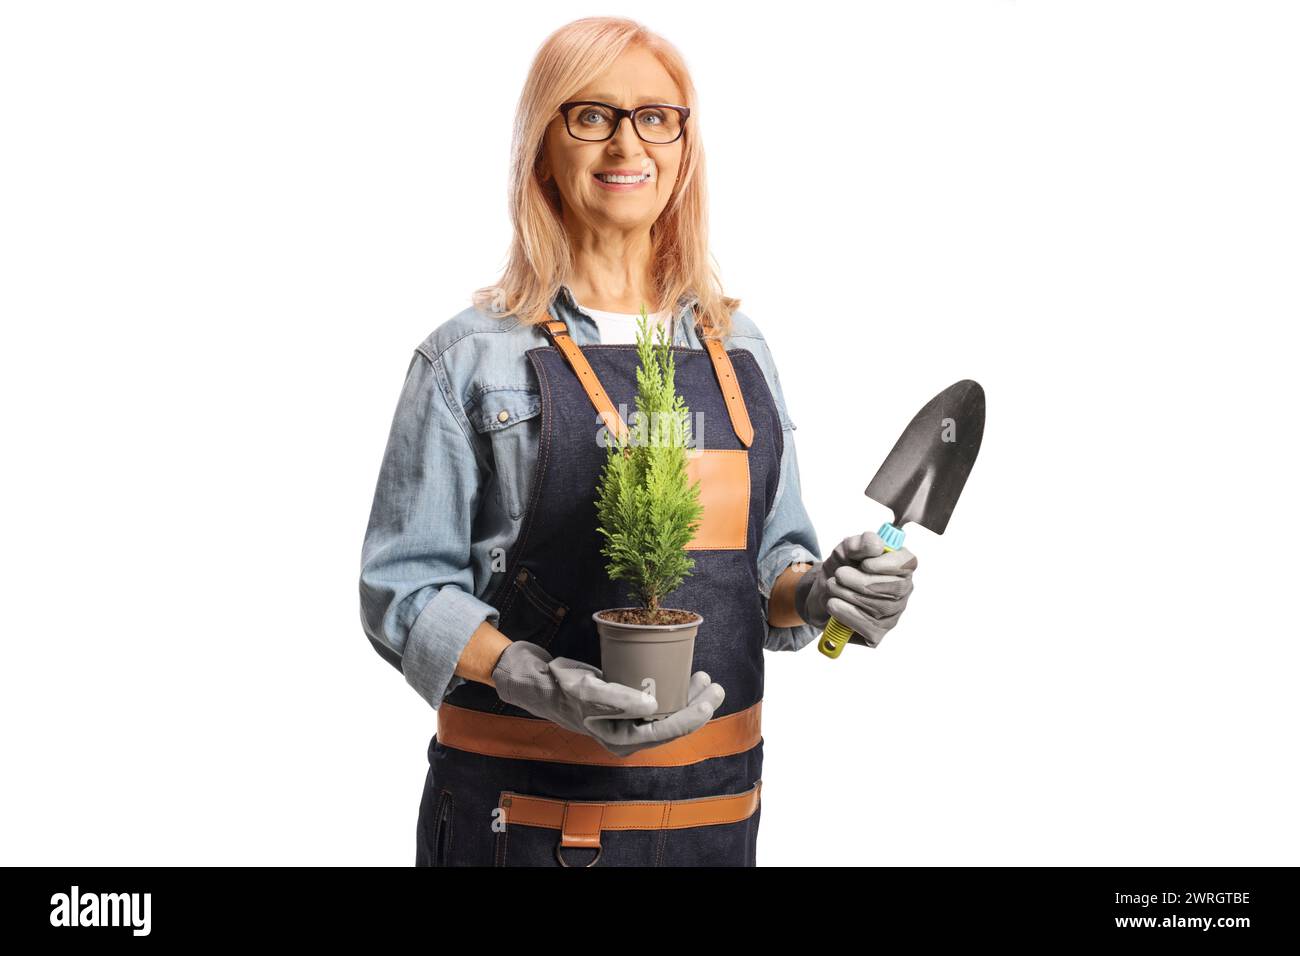 Woman with an apron planting a small evergreen tree isolated on white background Stock Photo